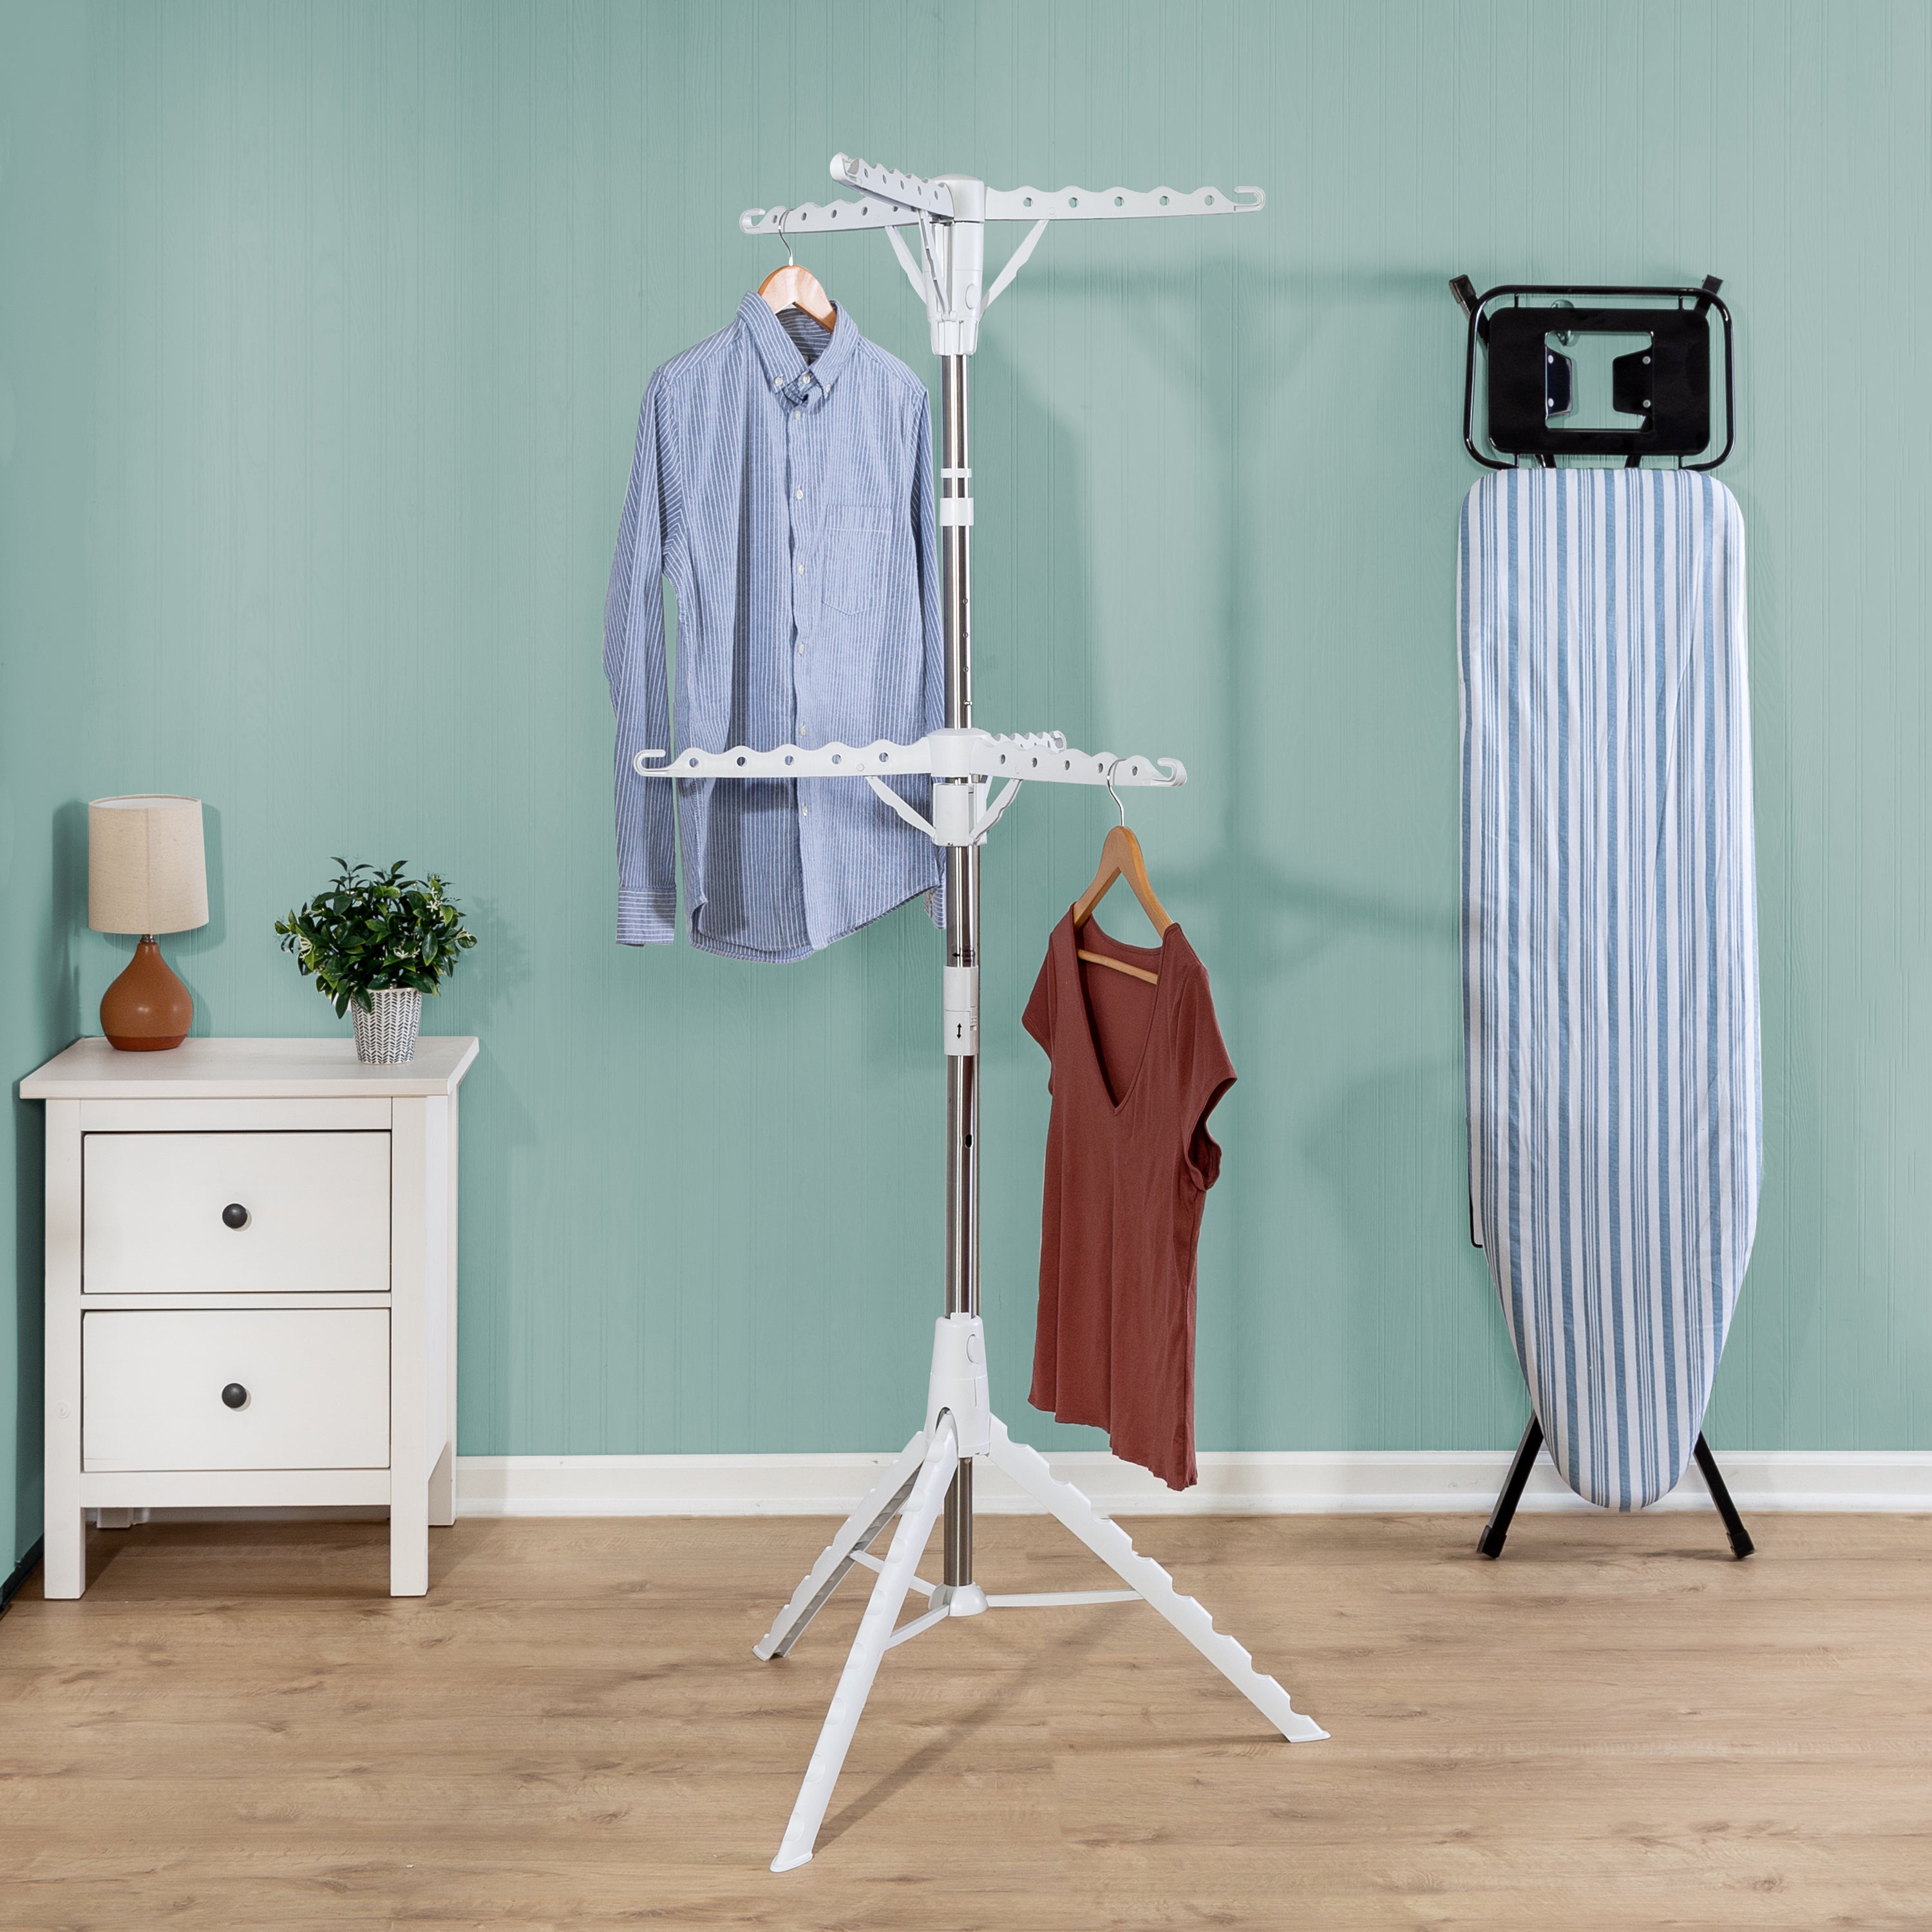 Multifunctional Floor Folding Towel Drying Rack Transportable Laundry Stand  Drying Rack 2 Tier Tripod Clothes Hanger